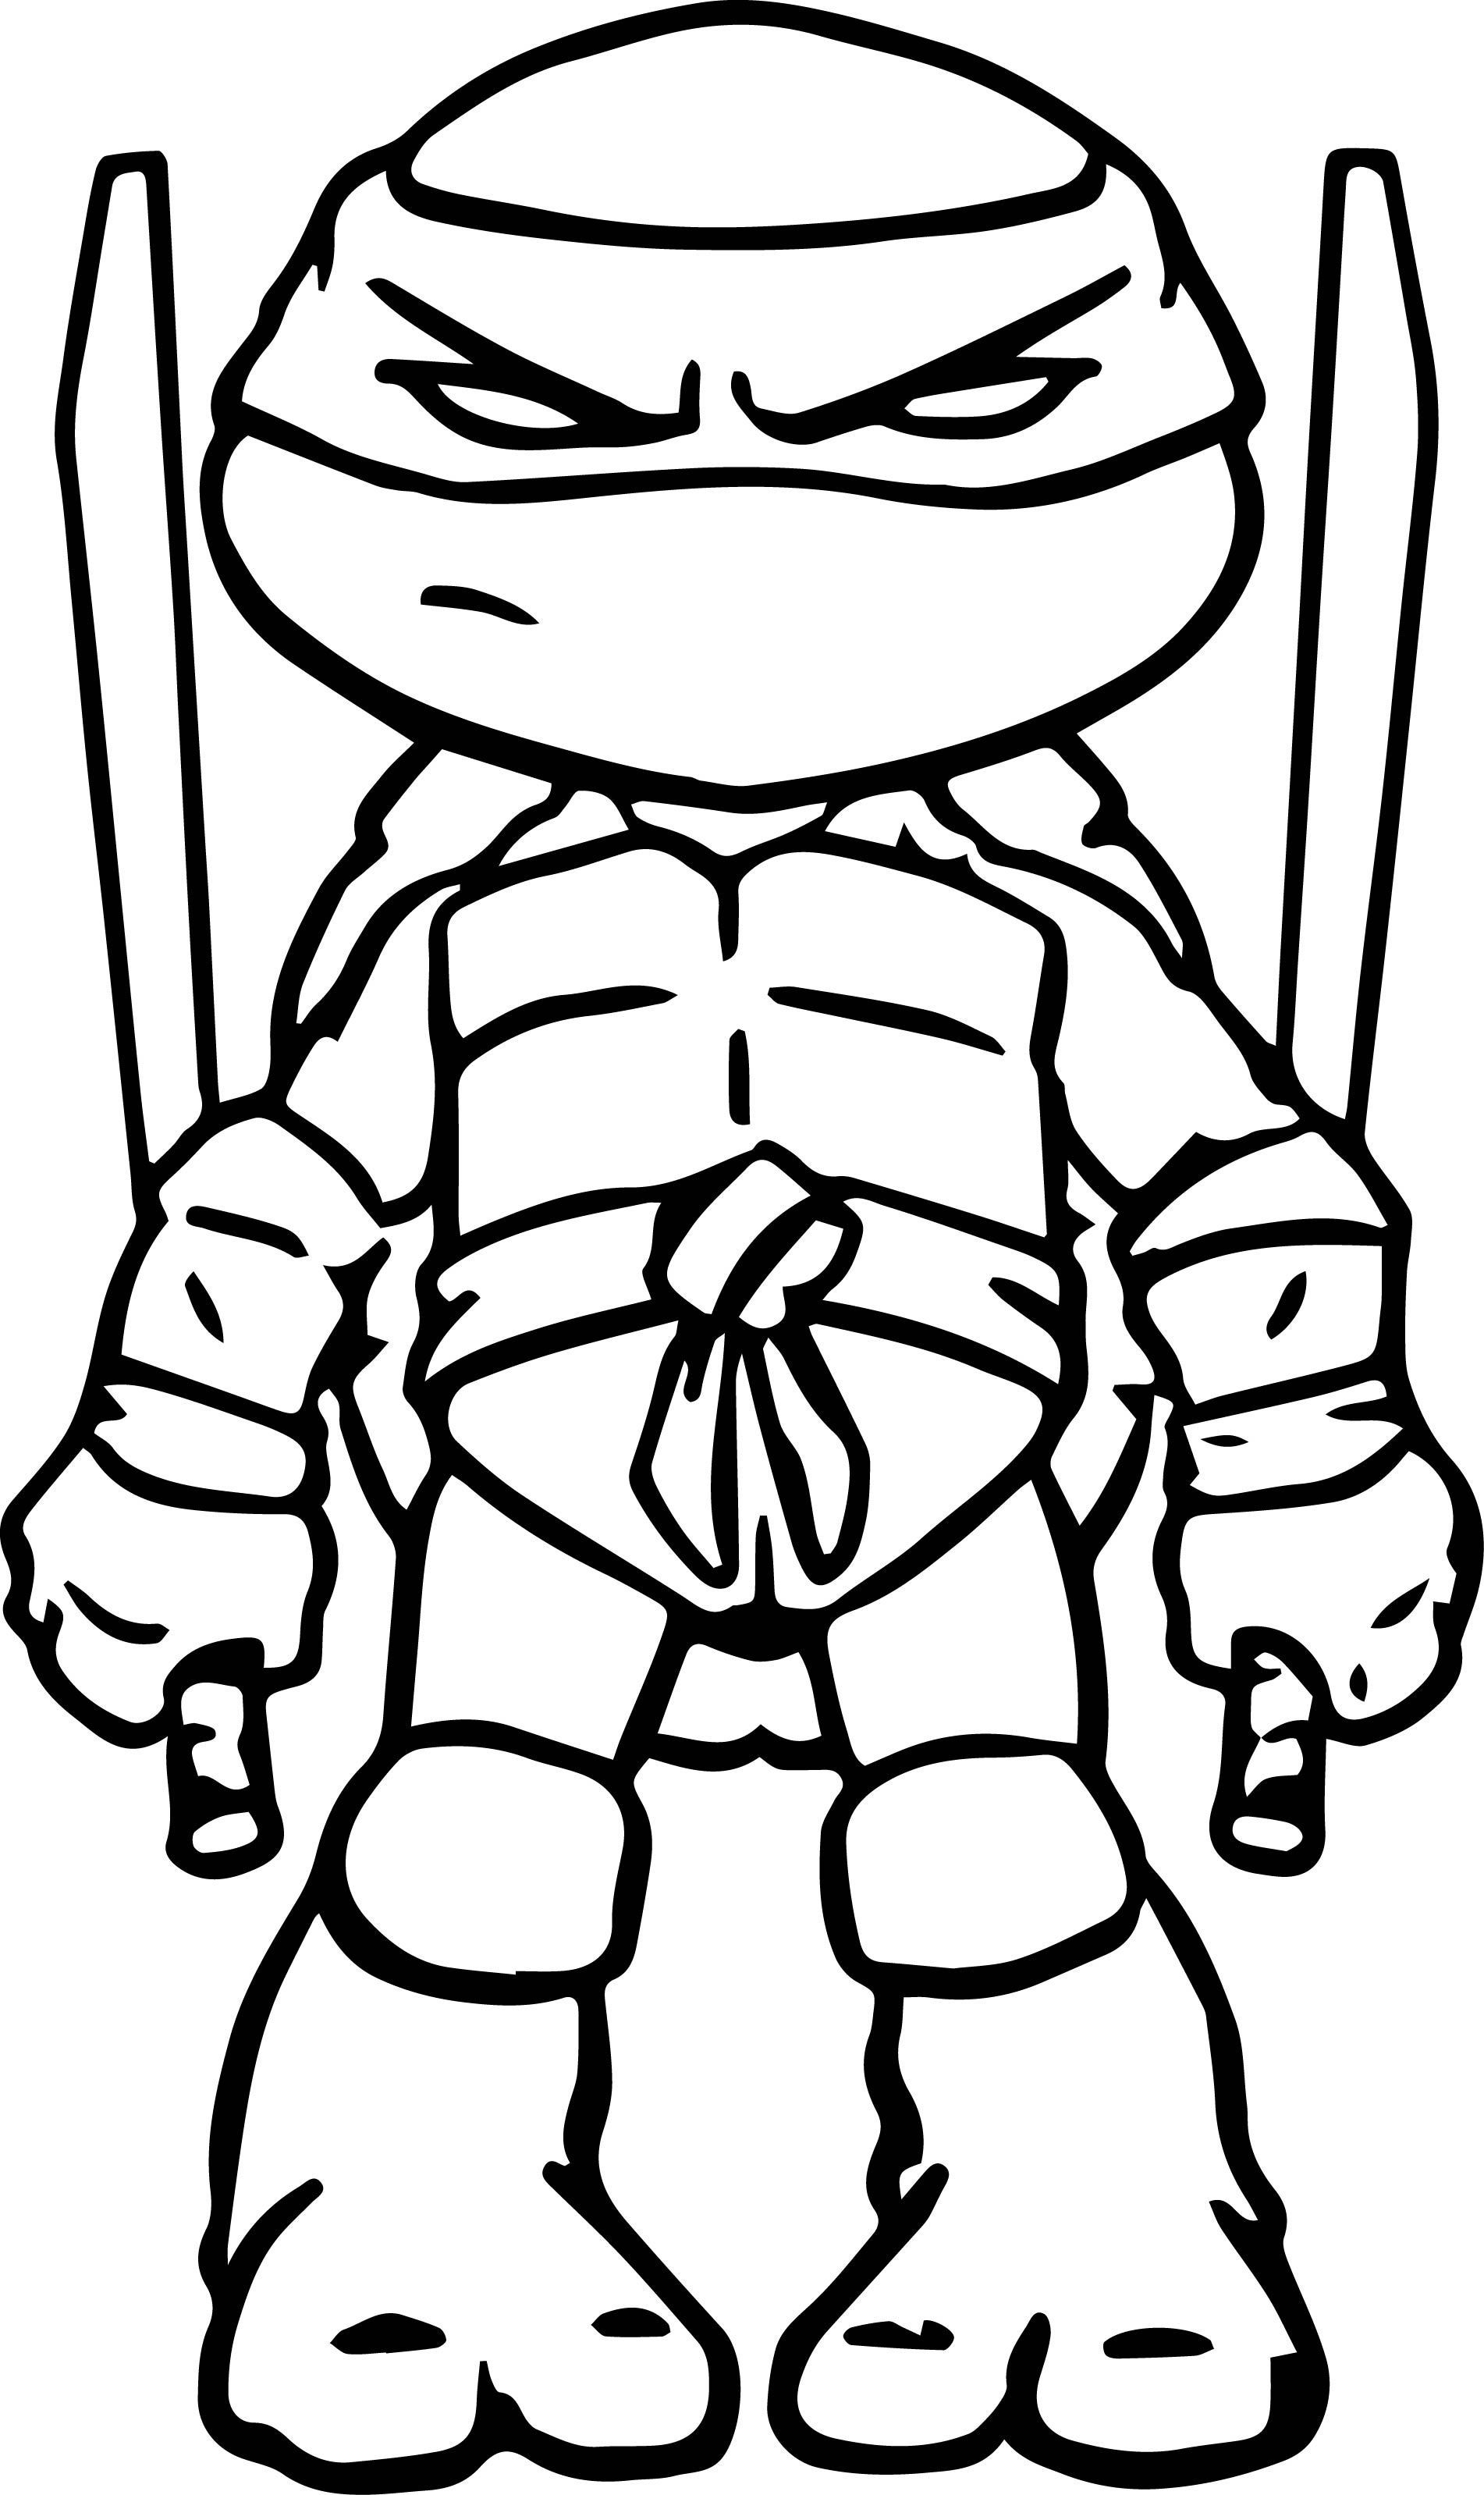 ninja turtle coloring pages | High Quality Coloring Pages